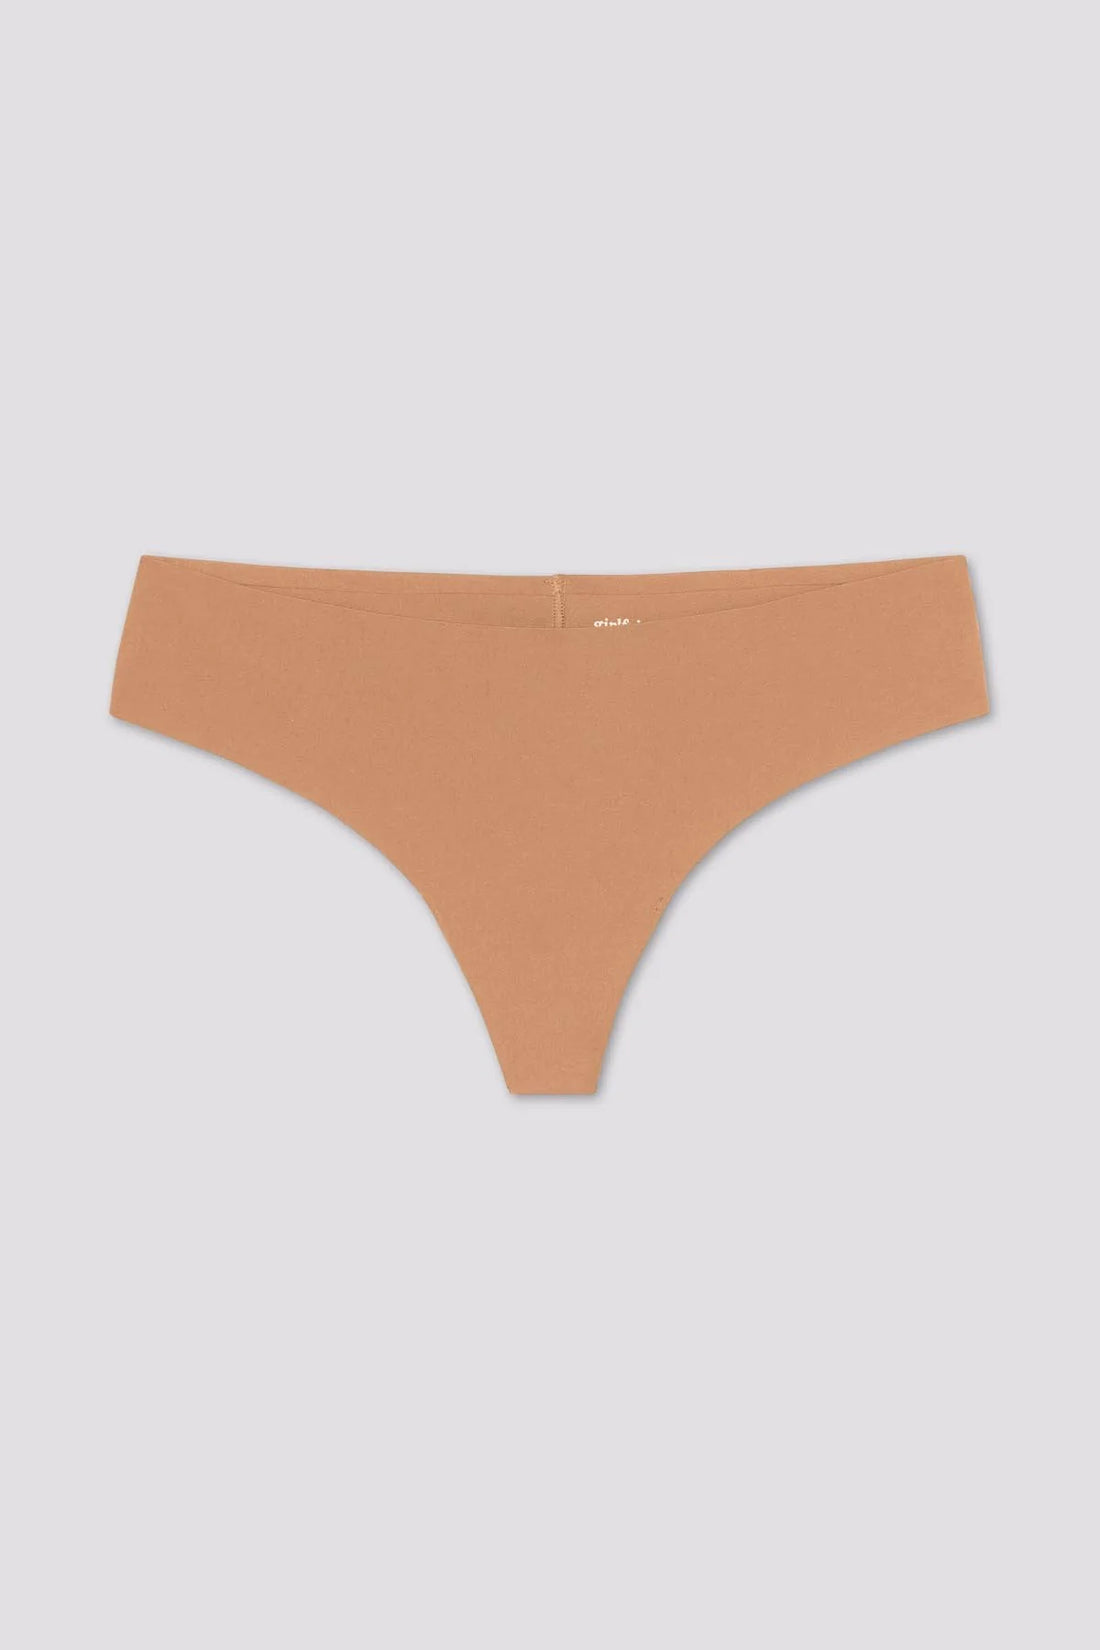 Girlfriend Collective Sport Thong in Toast